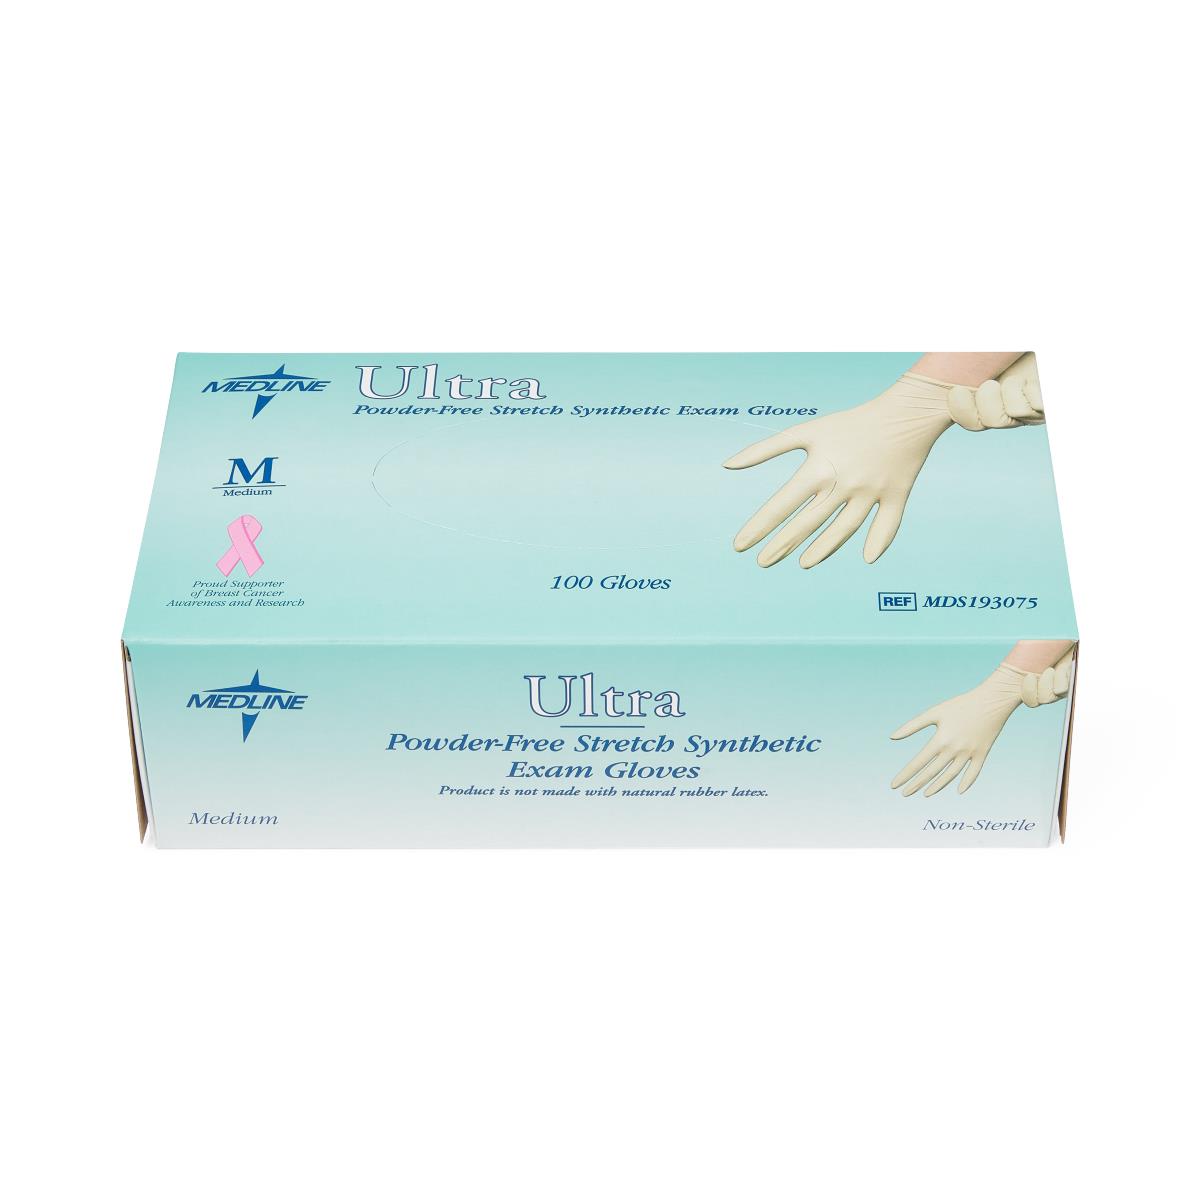 Ultra Powder-Free Stretch Synthetic Exam Gloves, Latex-Free